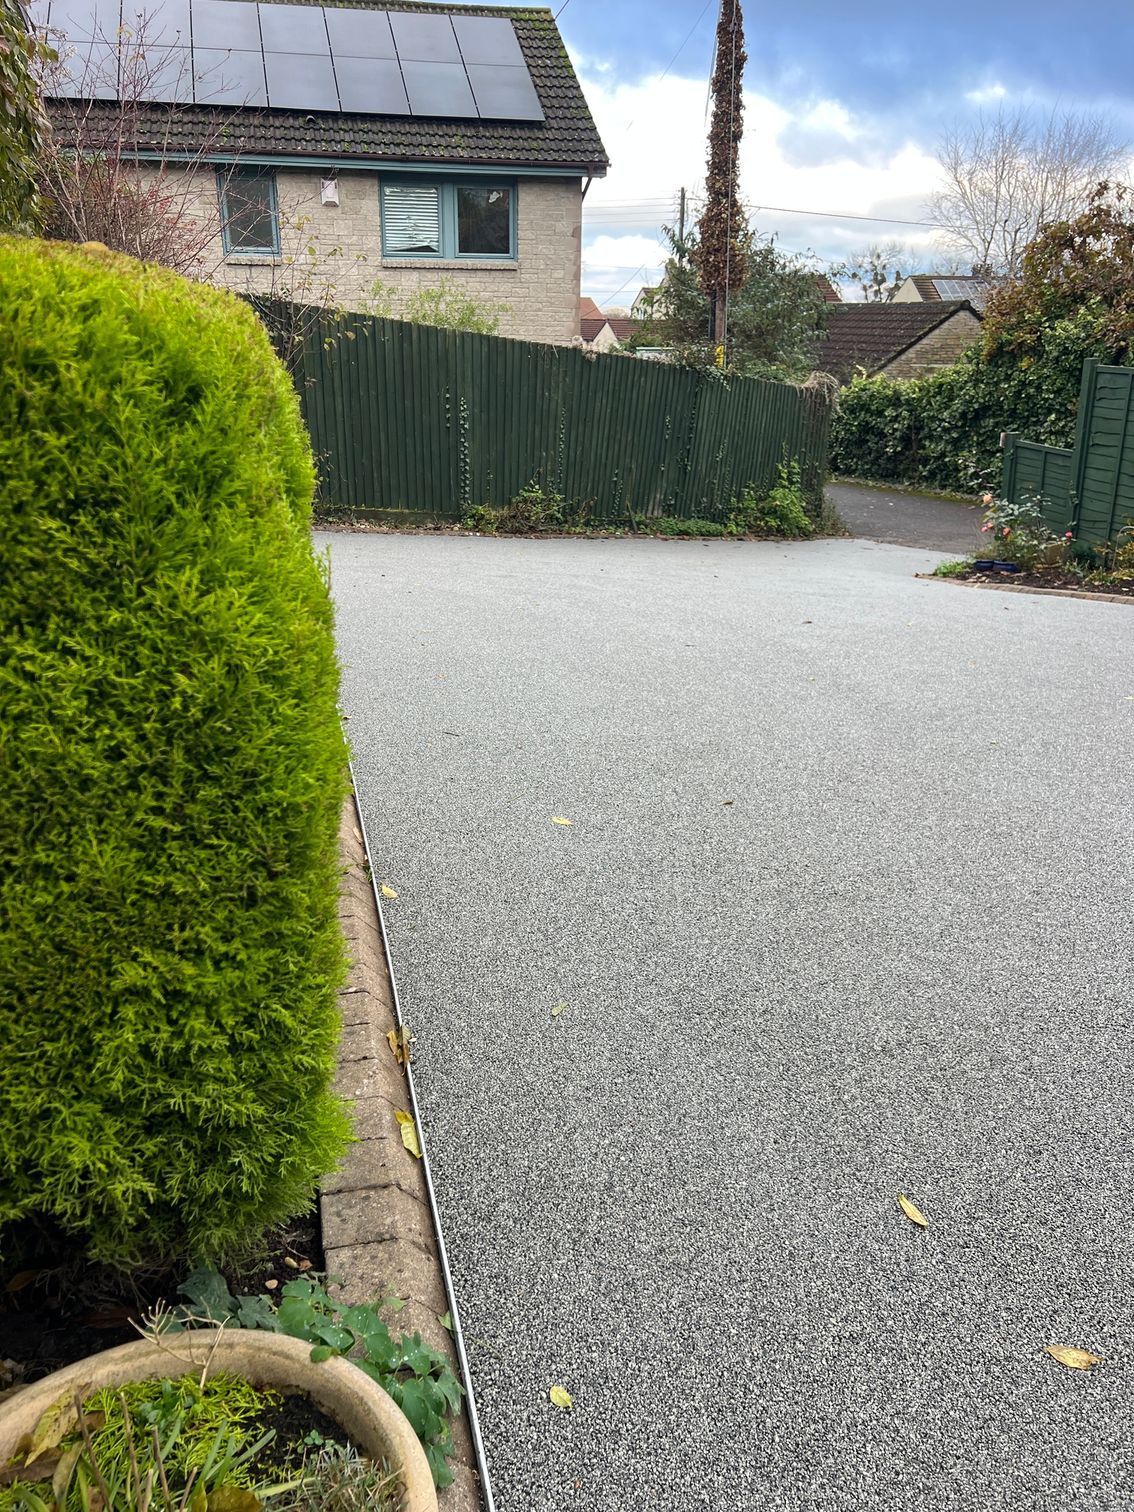 Grey resin driveway surrounded by bushes and wooden fences.